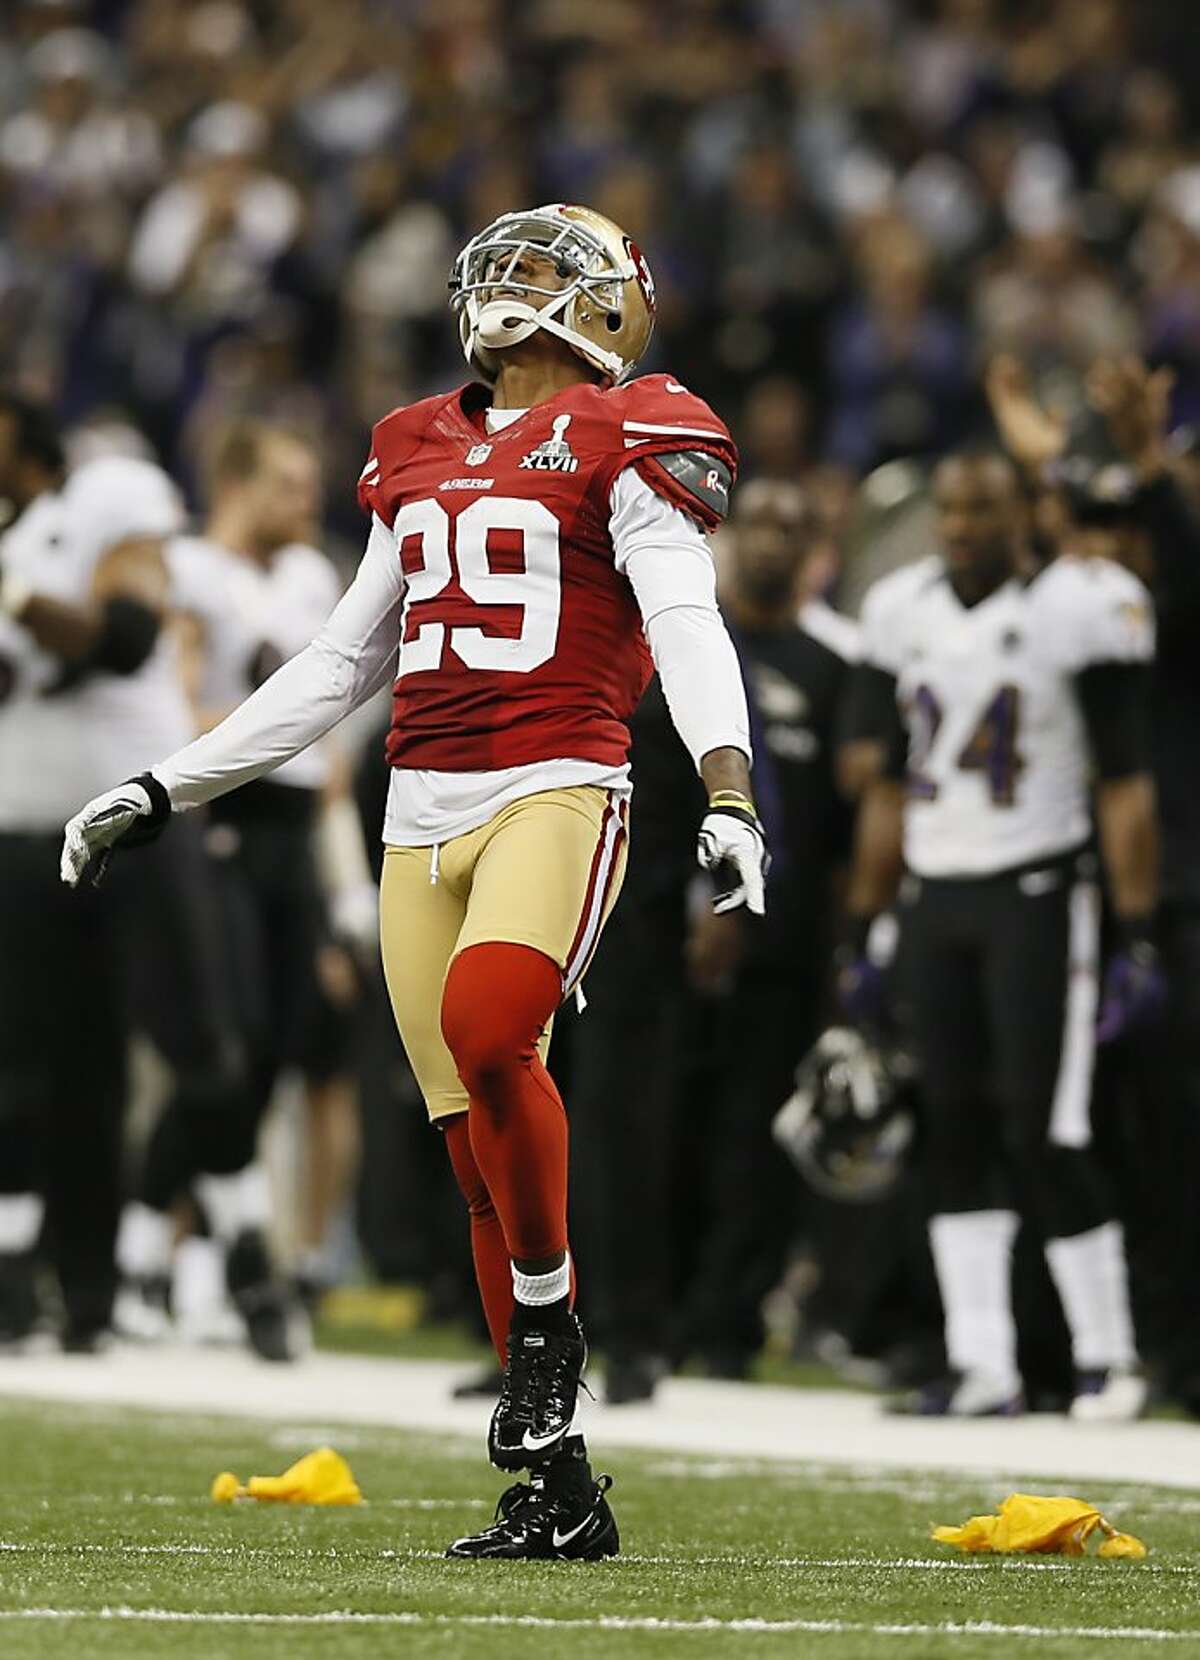 Cornerback Chris Culliver (29) during the fourth quarter of Superbowl XLVII between the San Francisco 49ers and the Baltimore Ravens at the Mercedes-Benz Superdome on Sunday February 3, 2013 in New Orleans, La.